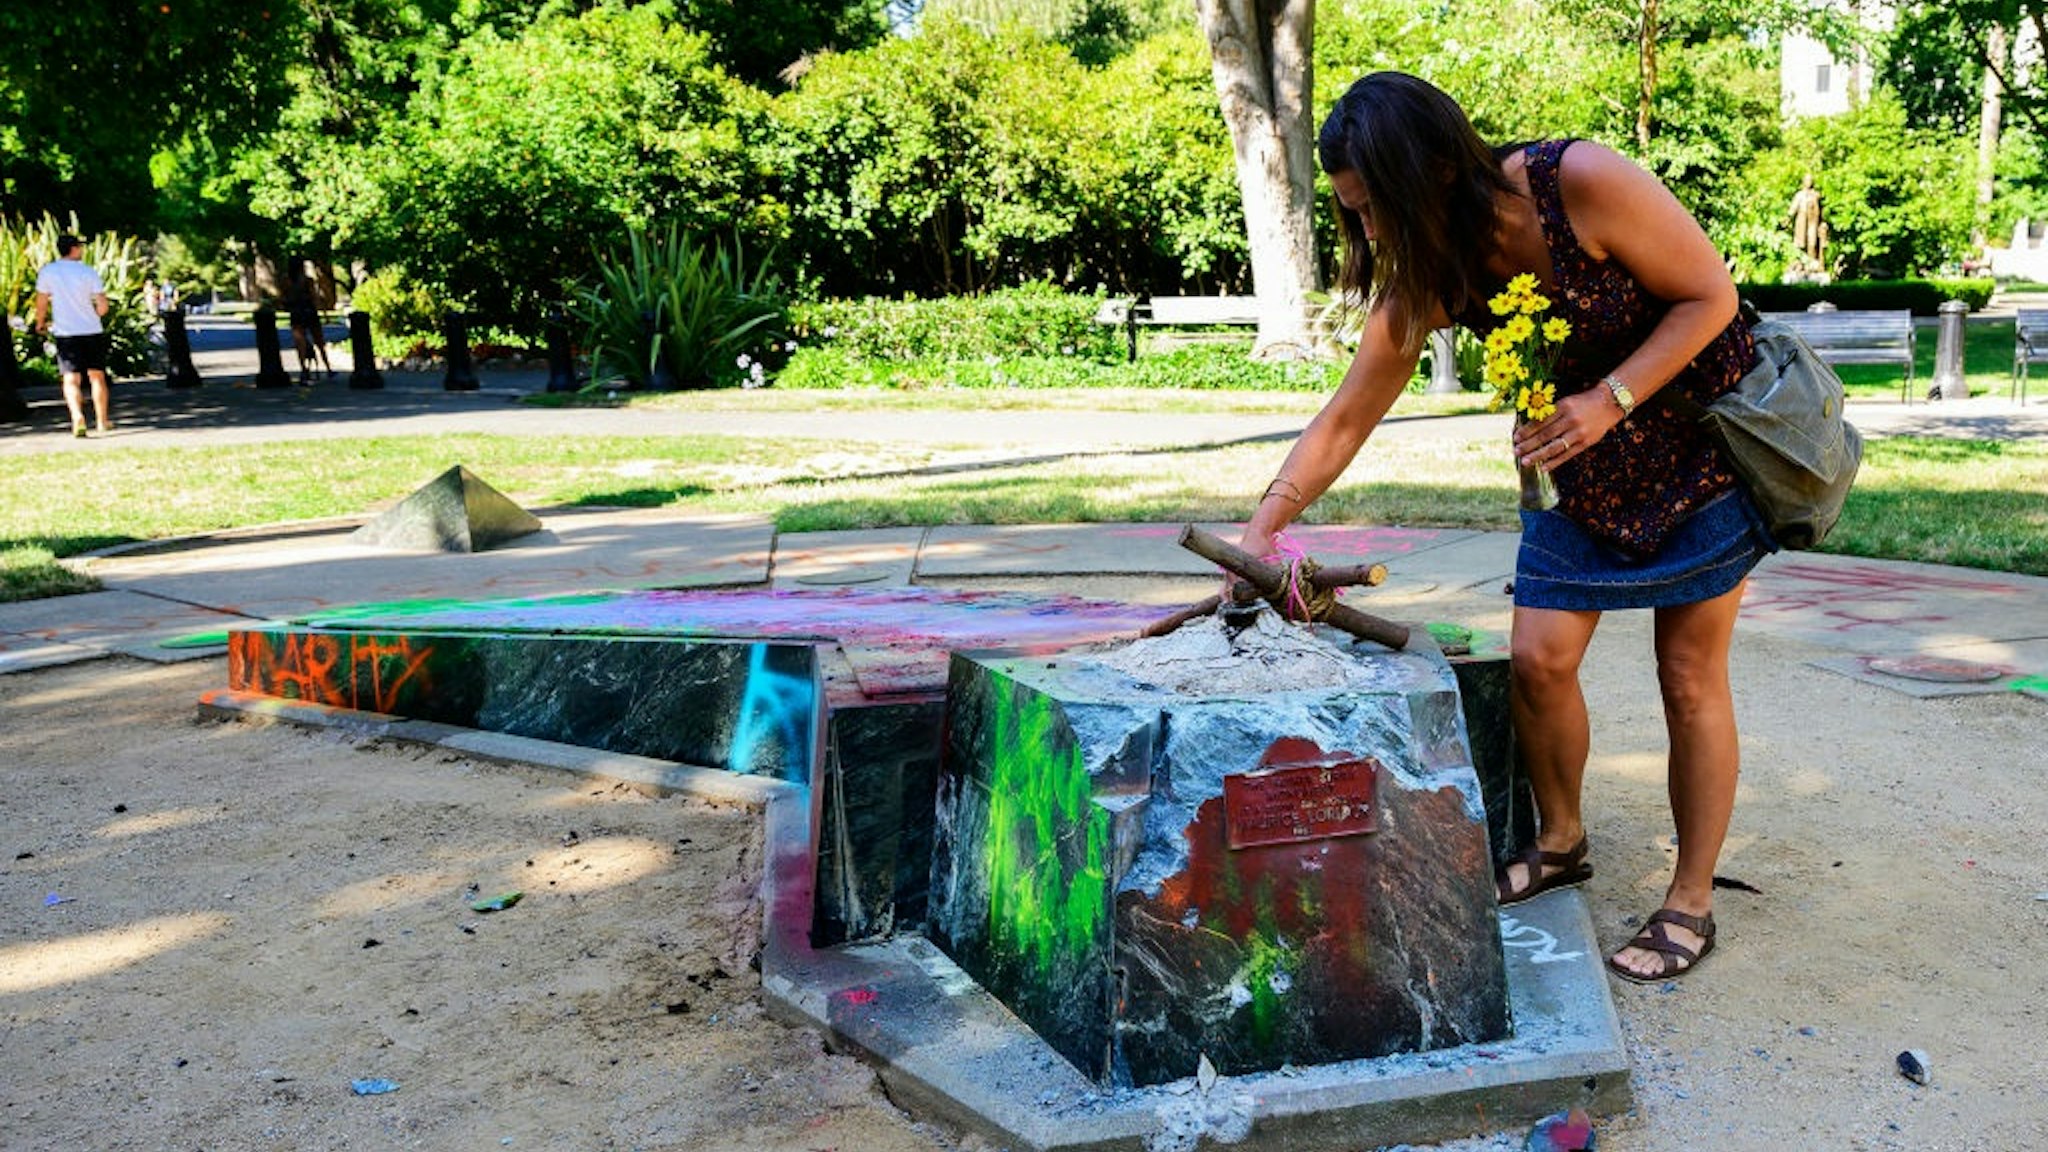 Devout Catholic Audrey Ortega creates a memorial at the former site of a statue memorializing Father Junipero Serra, a Spanish priest and friar who founded missions along California's coast in the 1700s, in Capitol Park on Sunday, July 5, 2020.